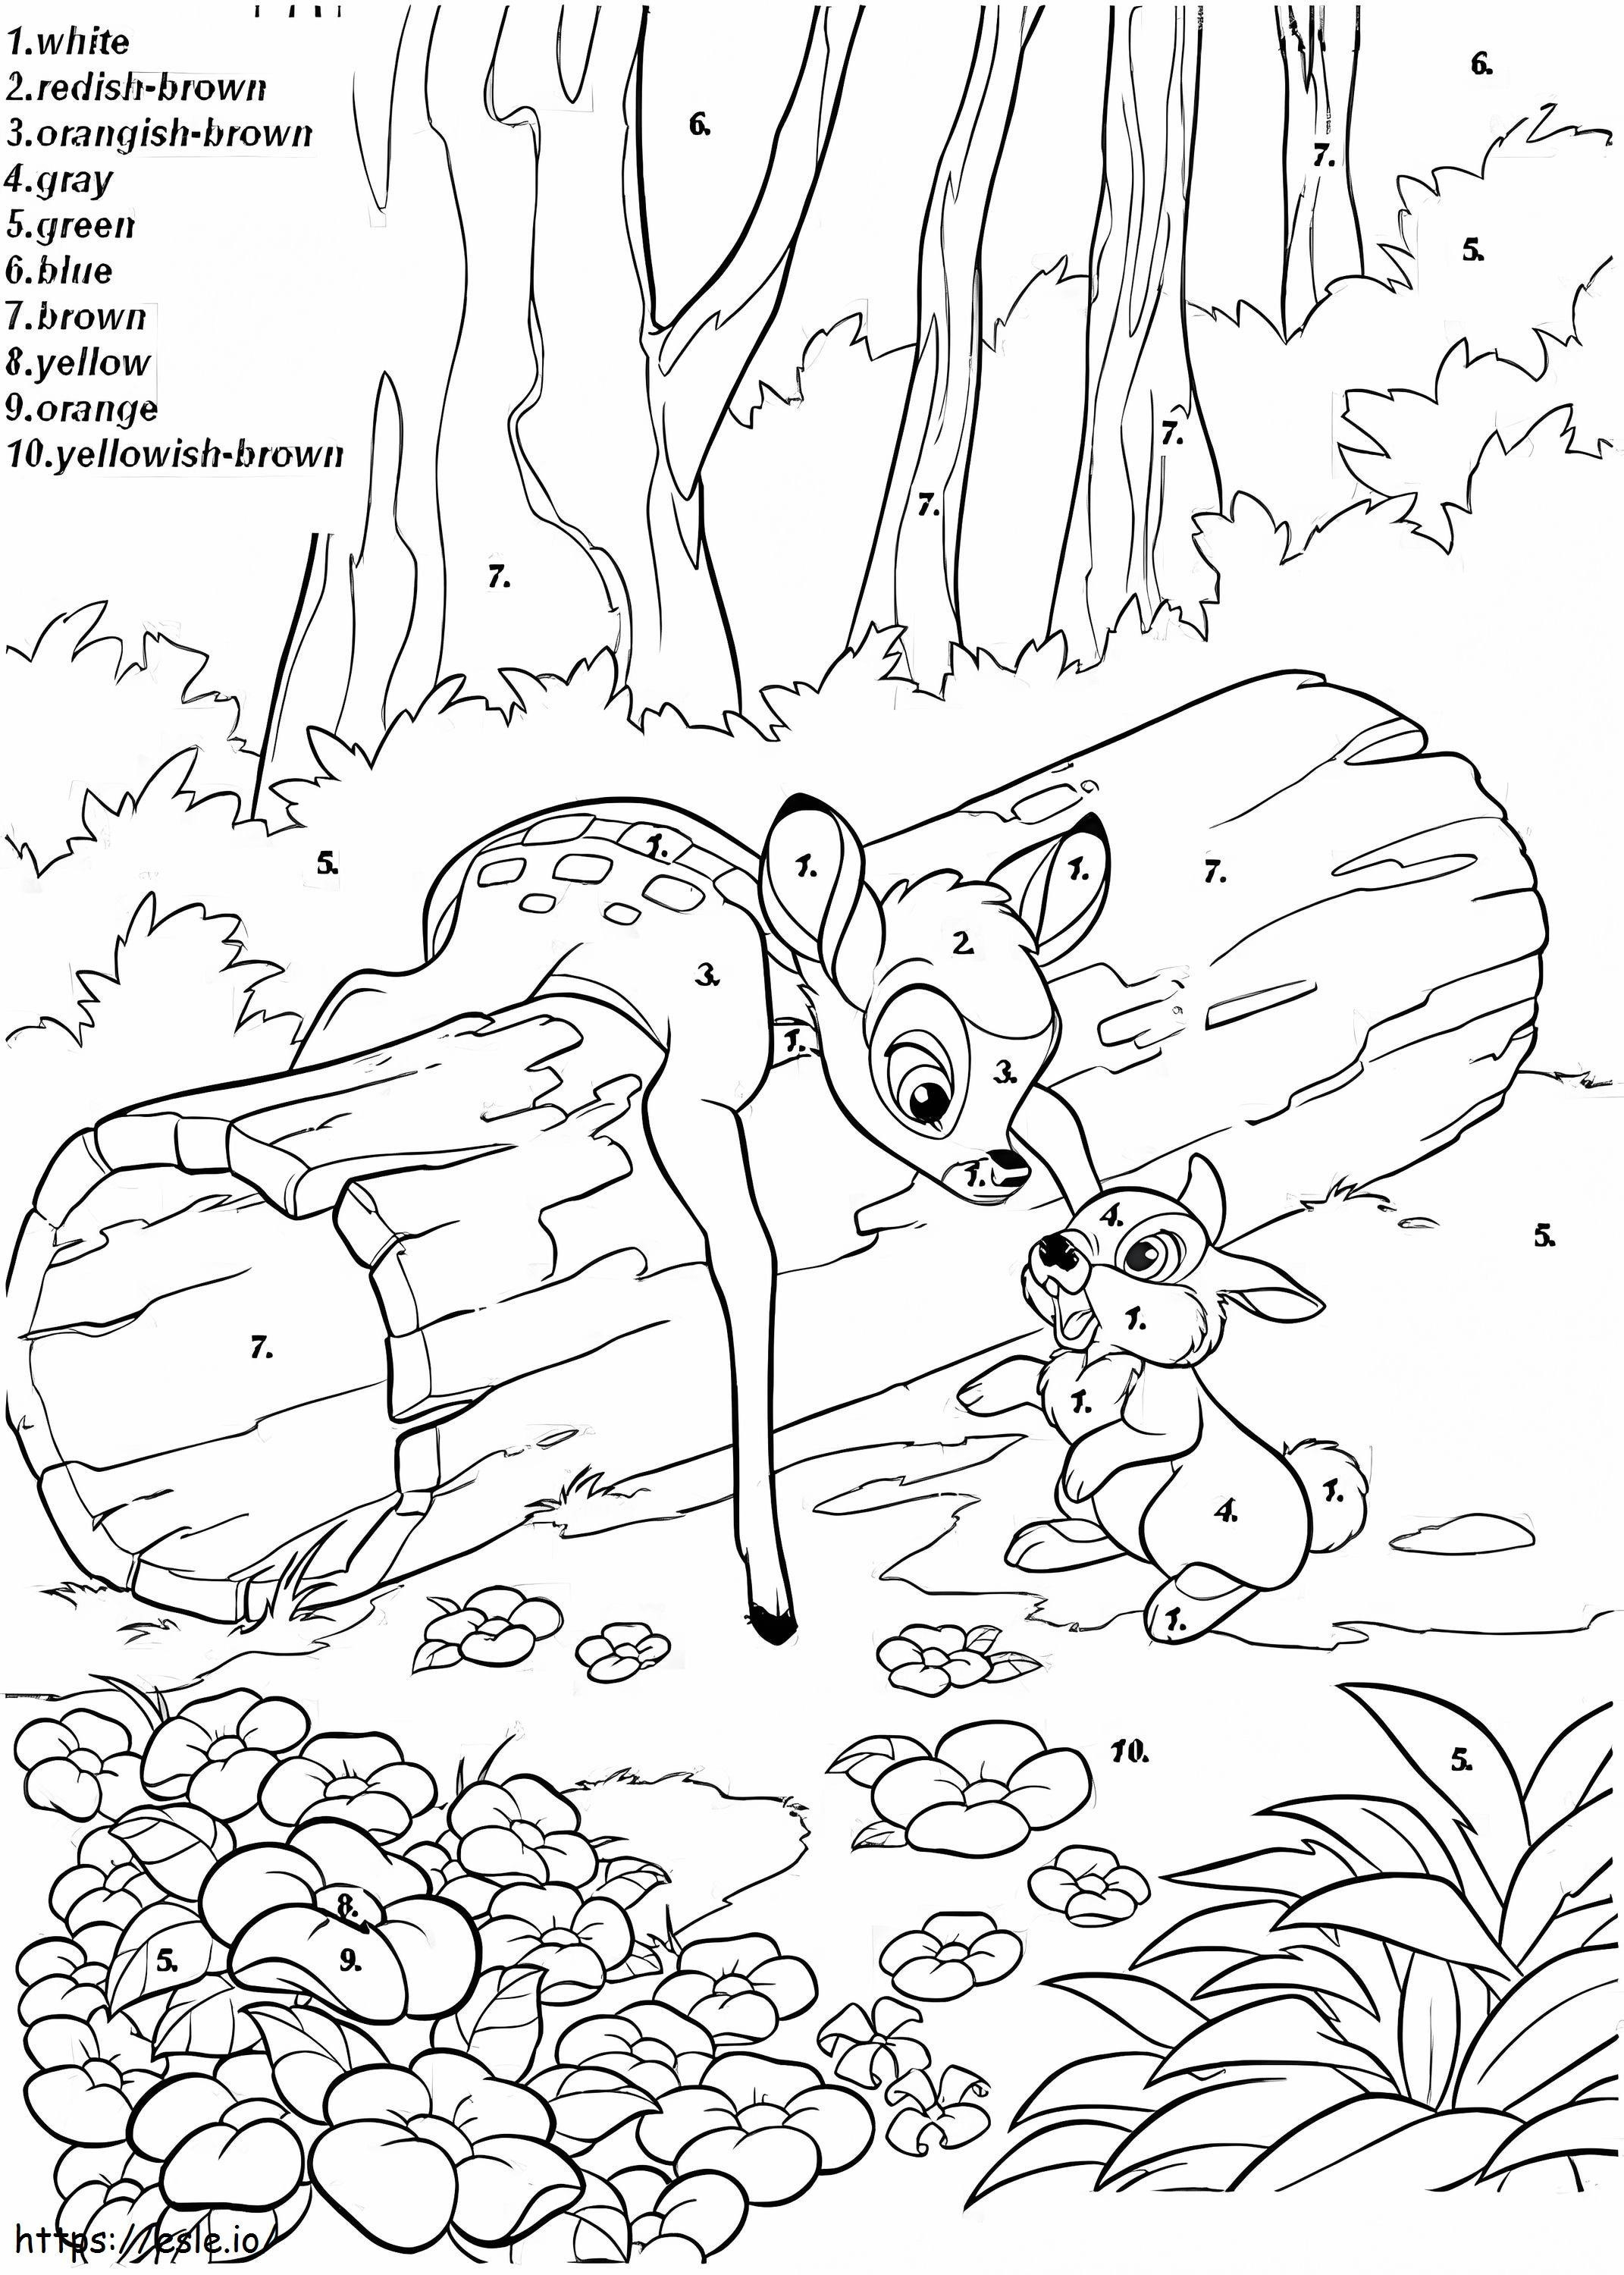 Disney Bambi Color By Number coloring page